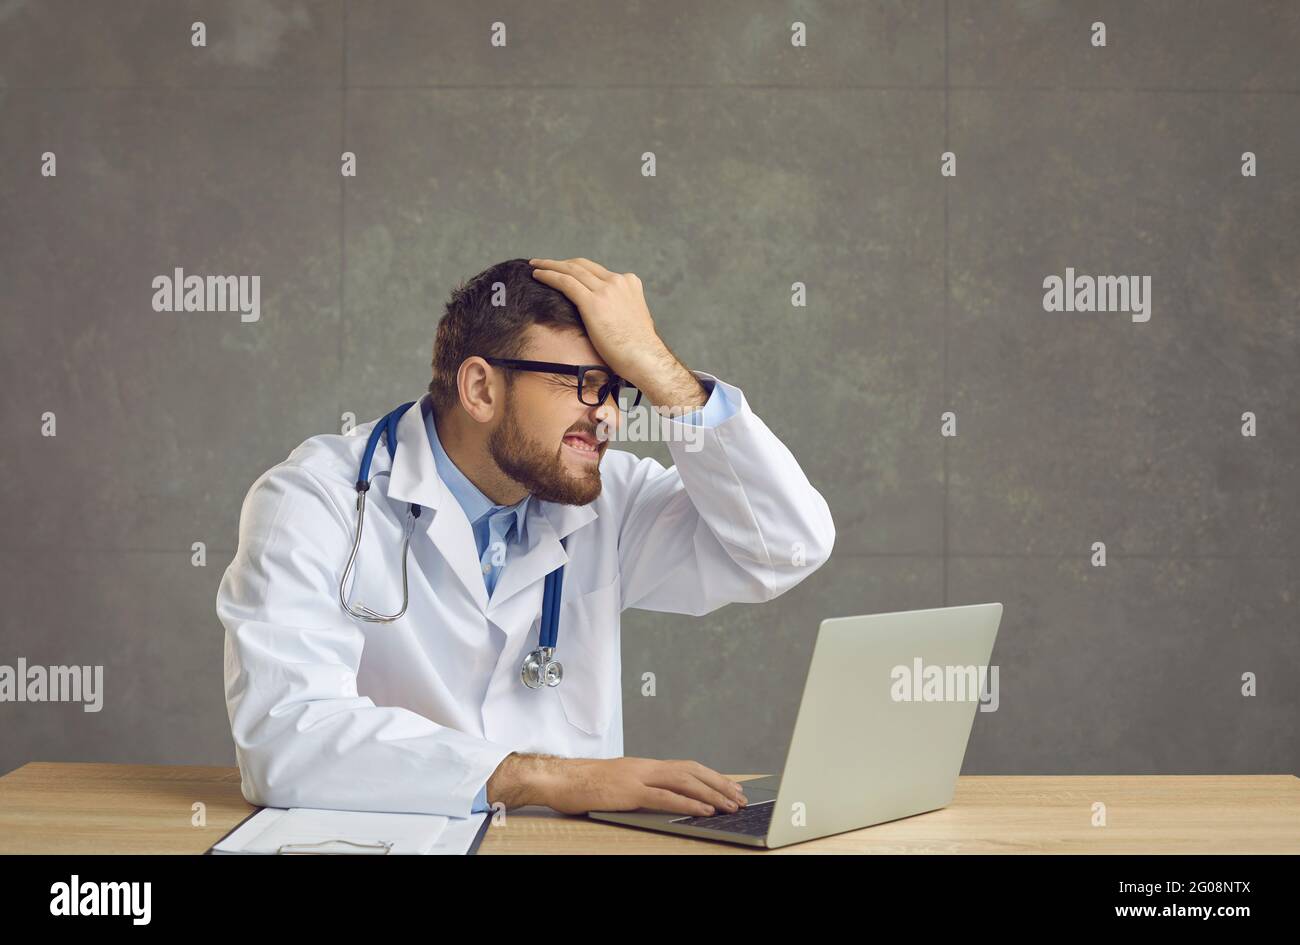 Male doctor forgot something and slapping forehead with palm and closing eyes. Stock Photo